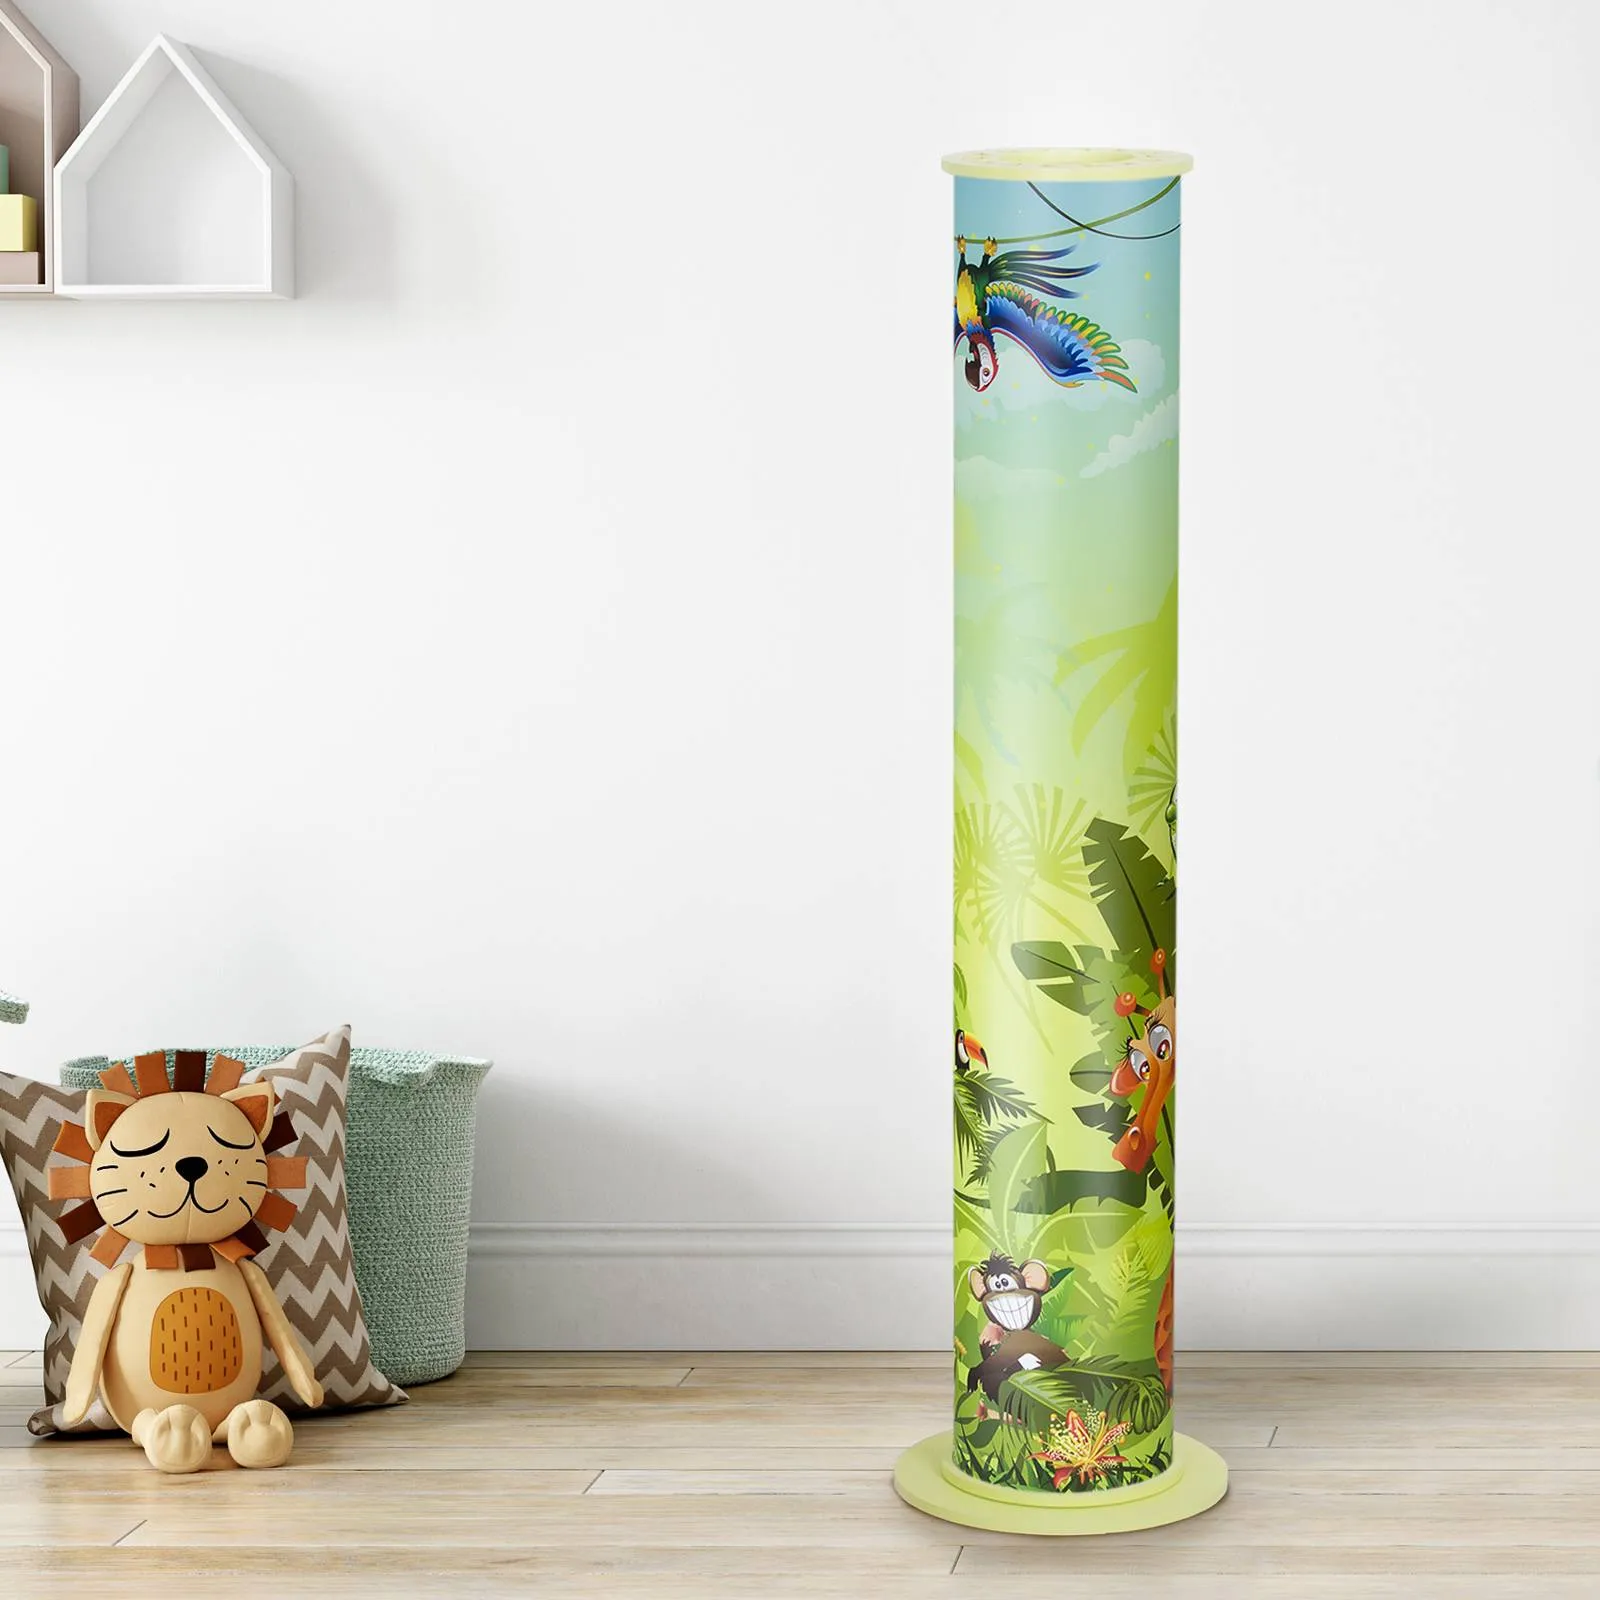 Wildlife floor lamp for a child’s room